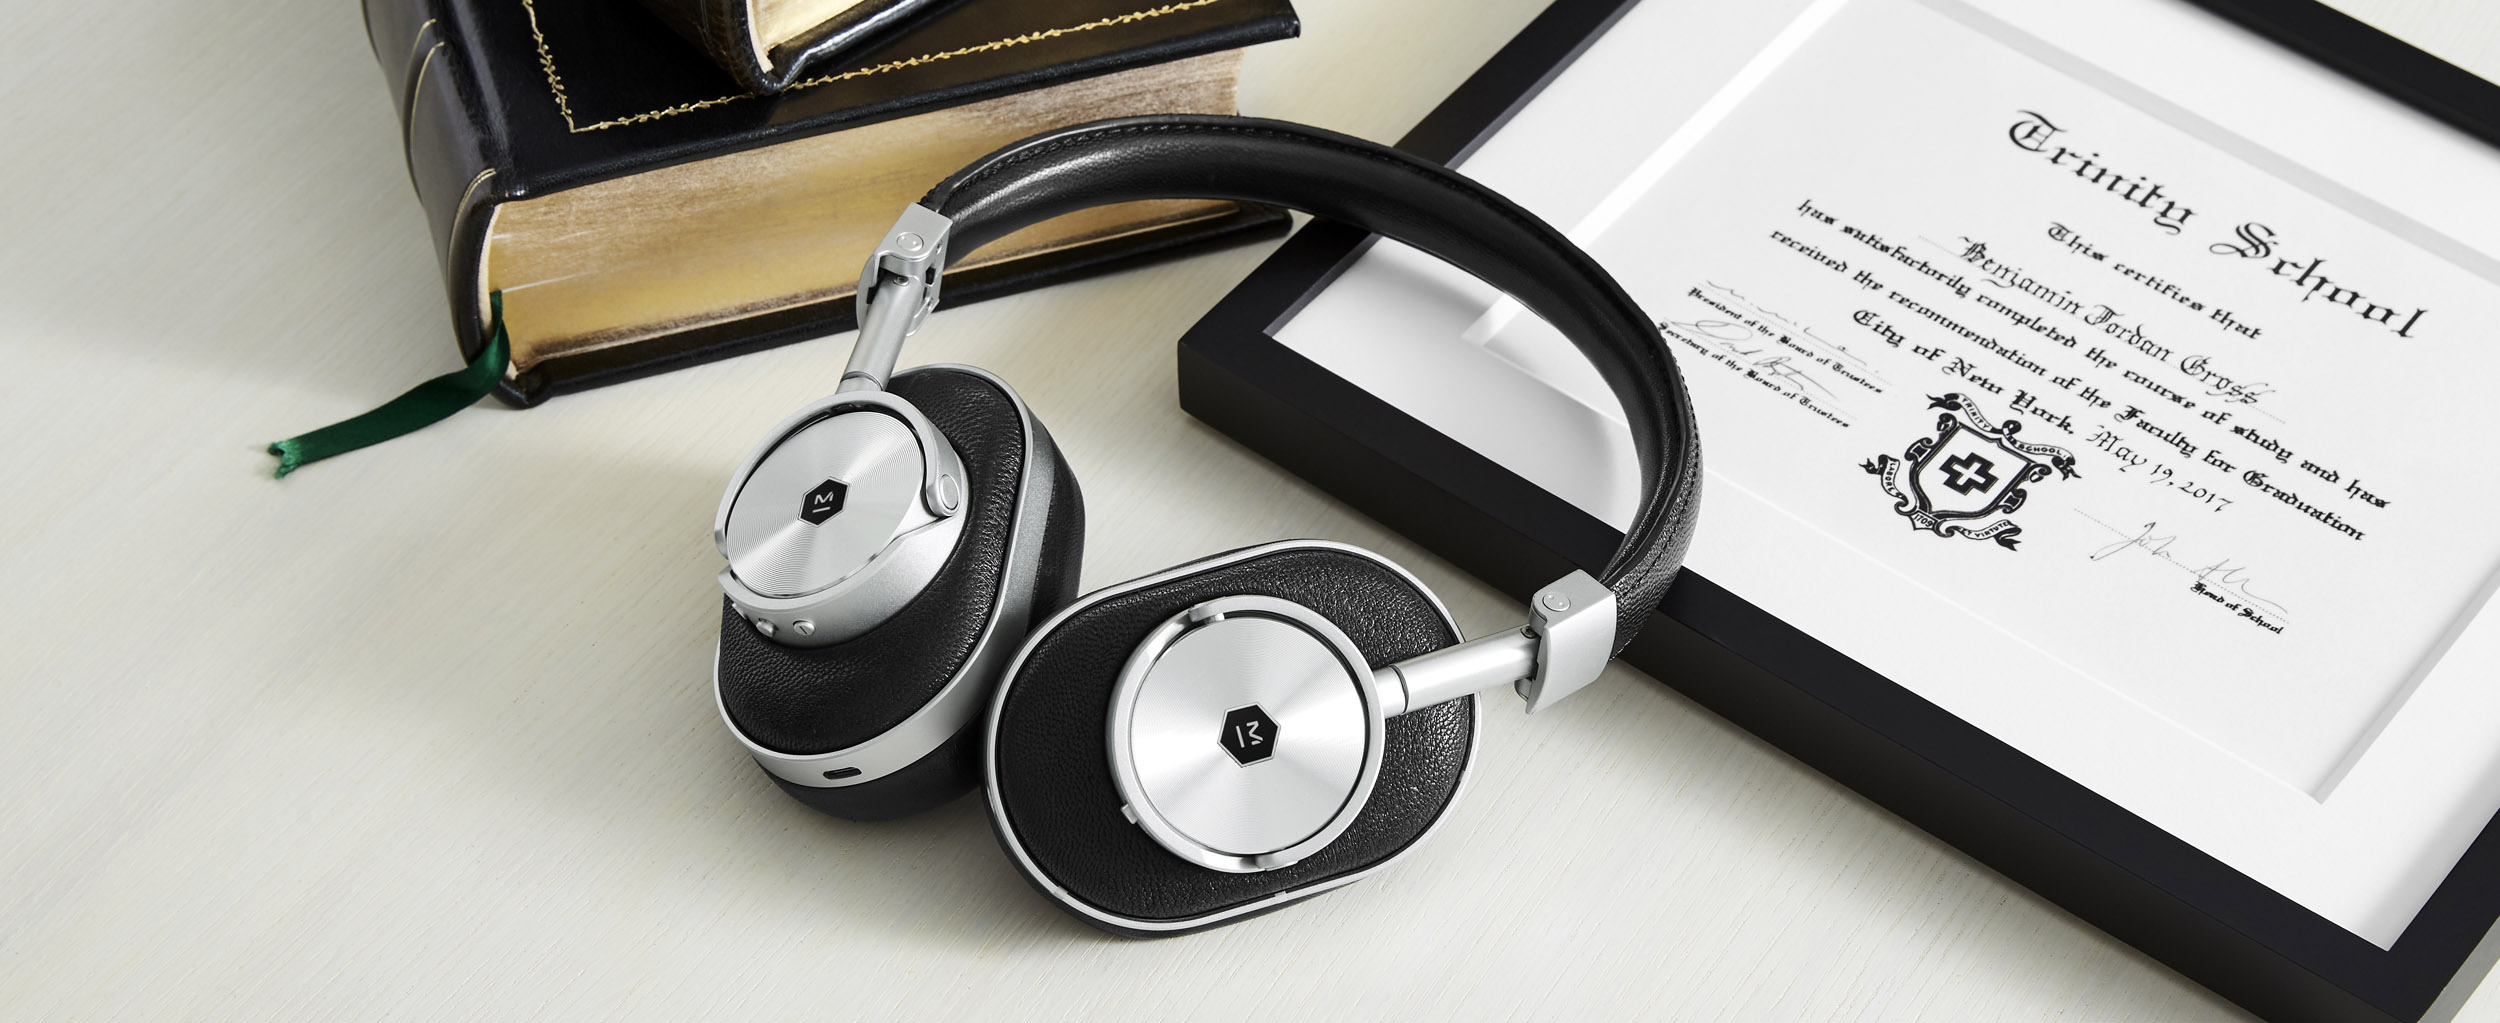 Two New Colorways For The MW60 Wireless Over-Ear Headphones